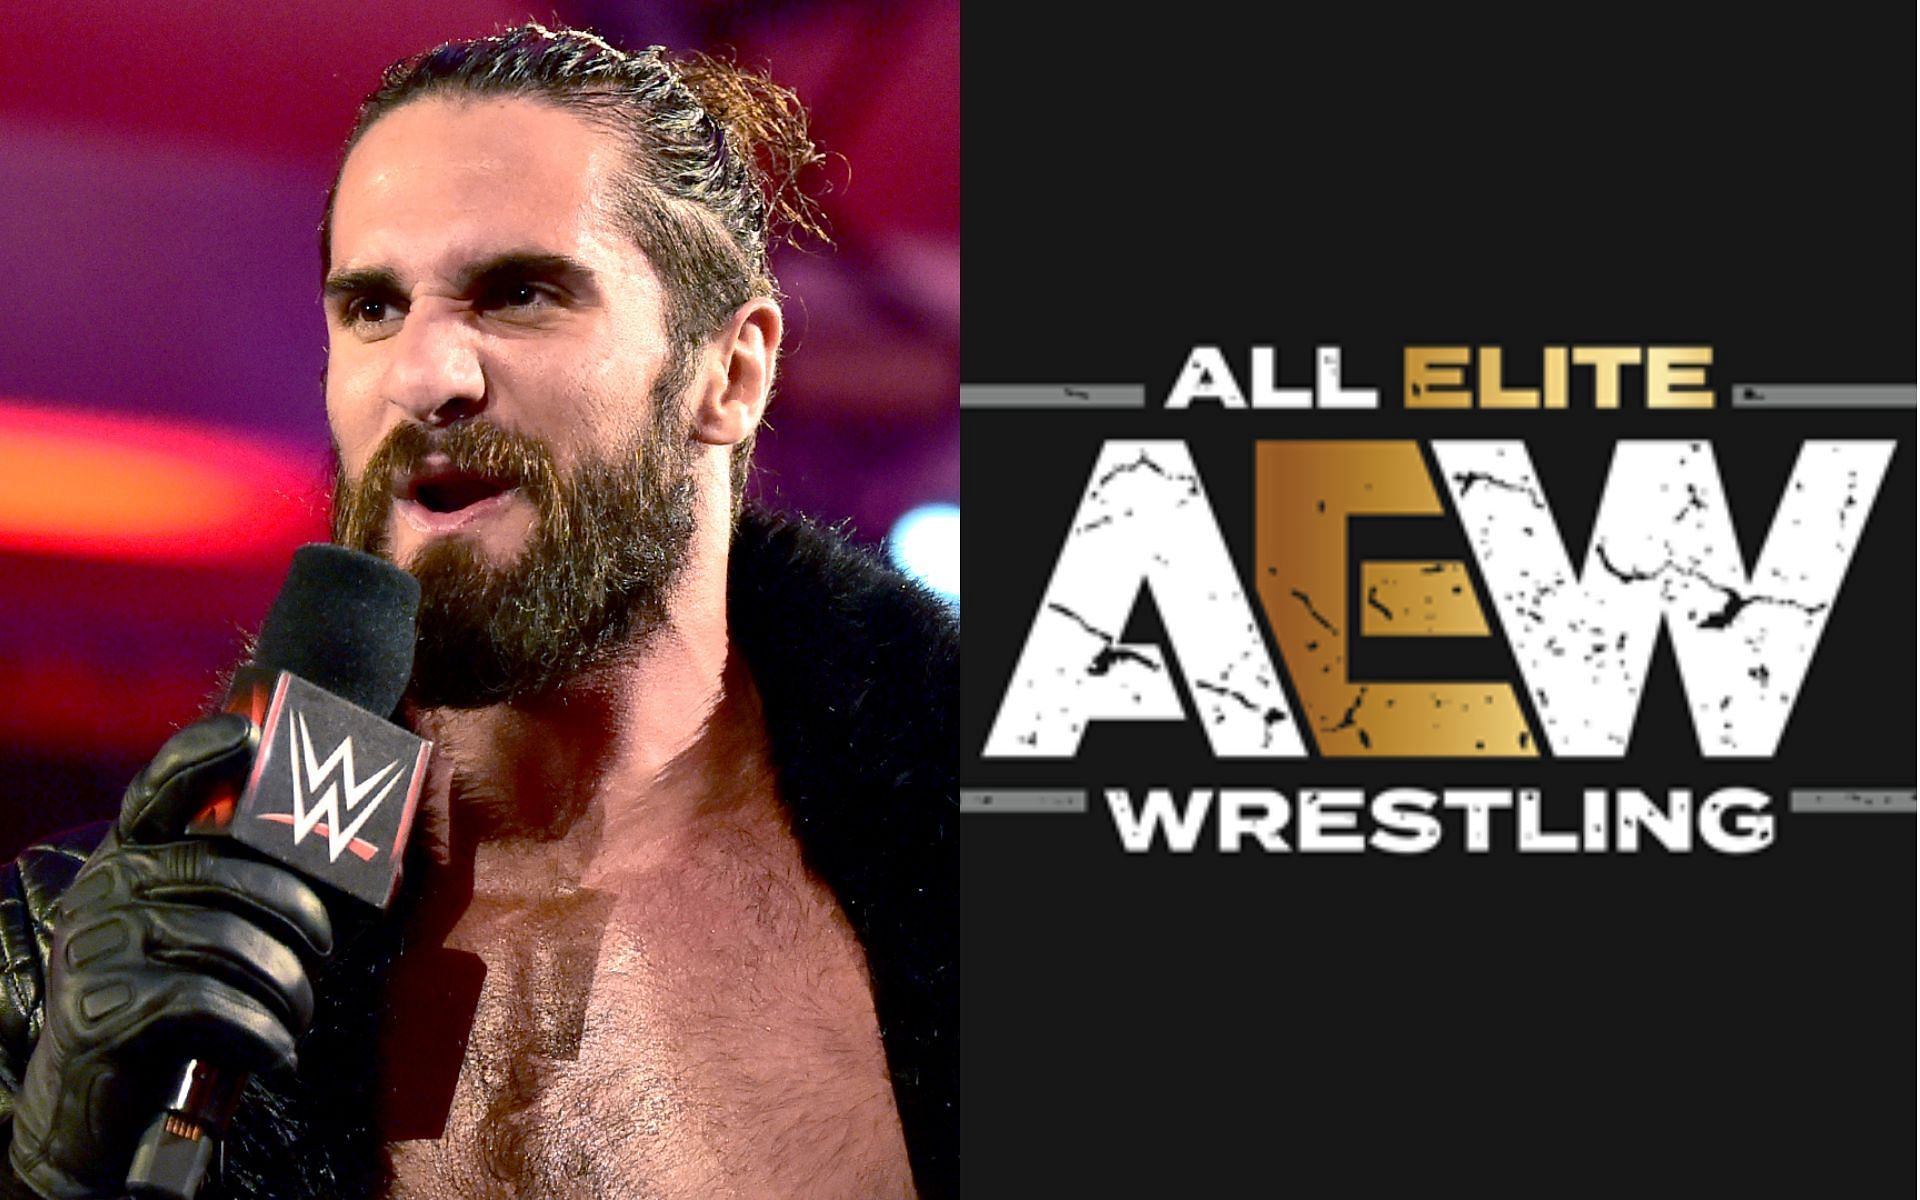 WWE superstar Seth Rollins (left) and AEW logo (right).